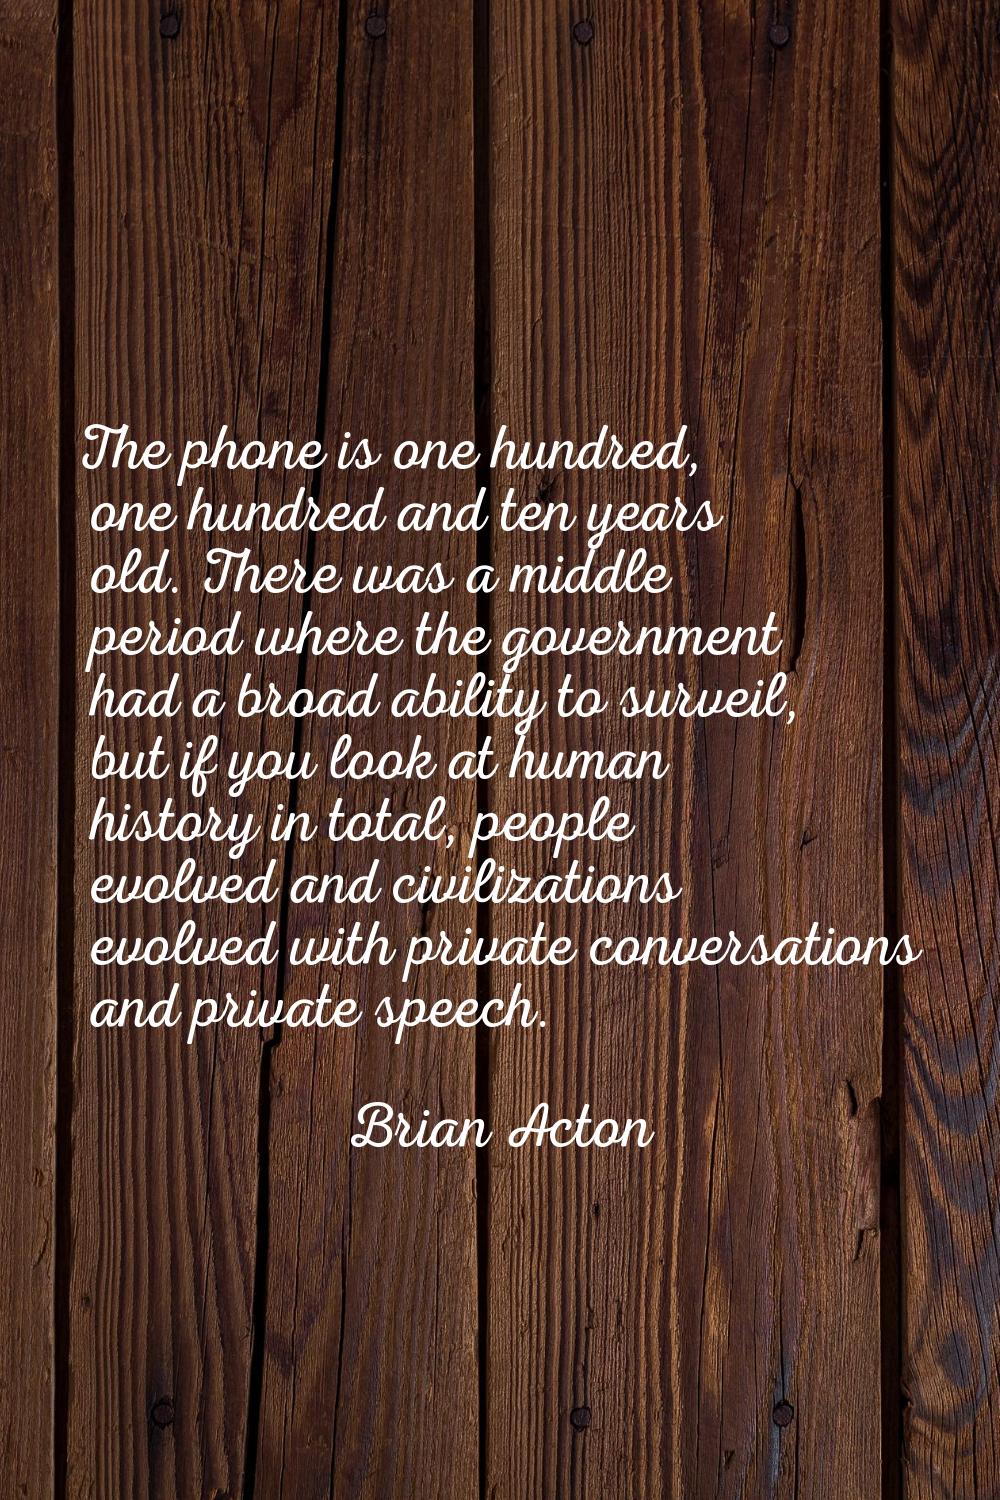 The phone is one hundred, one hundred and ten years old. There was a middle period where the govern